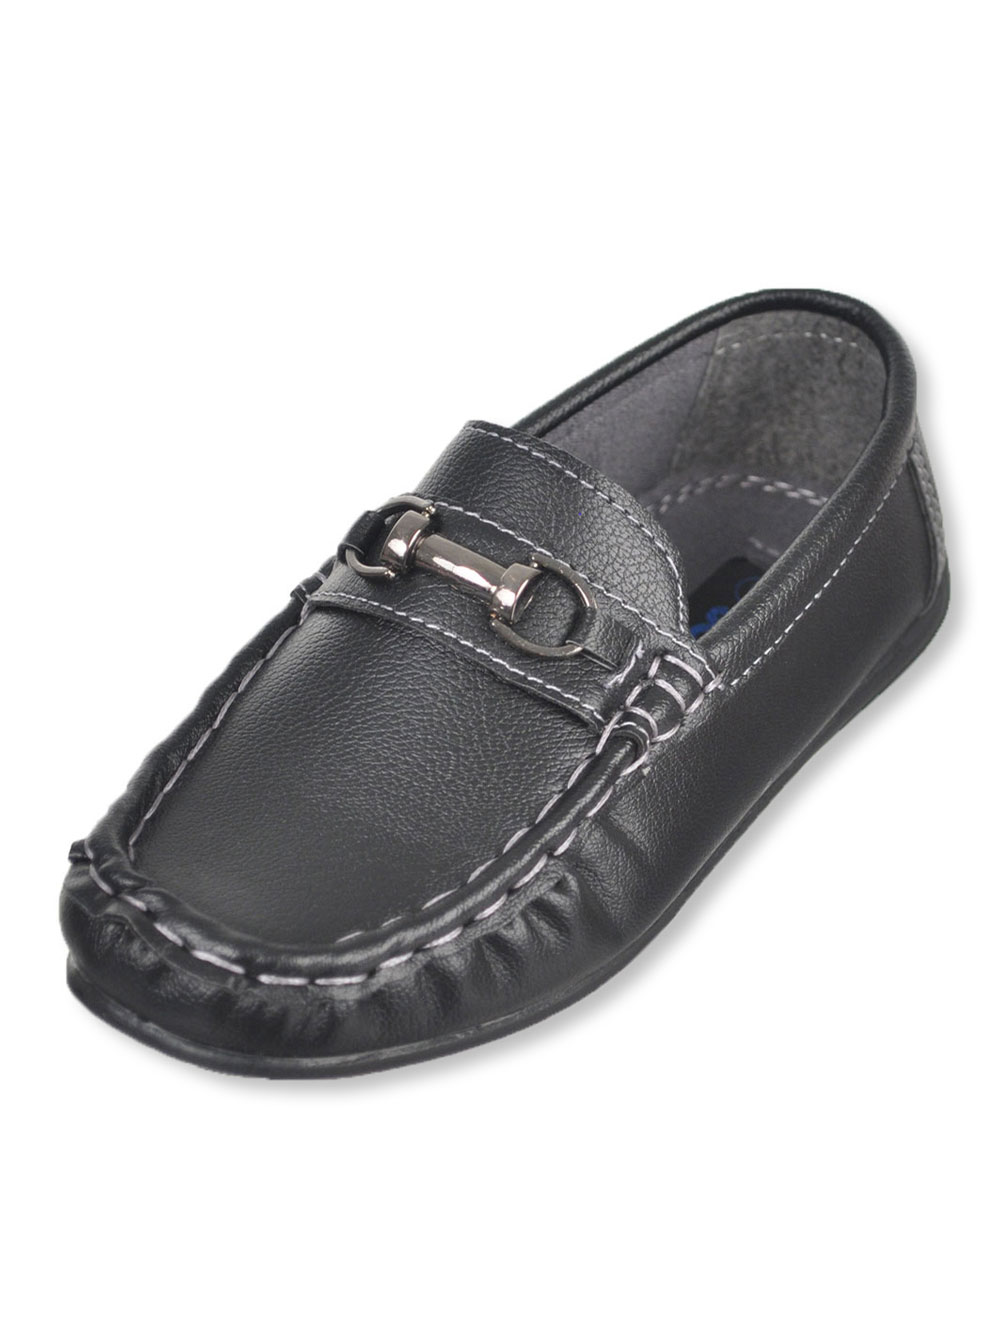 Boys' Clutch Driving Loafers